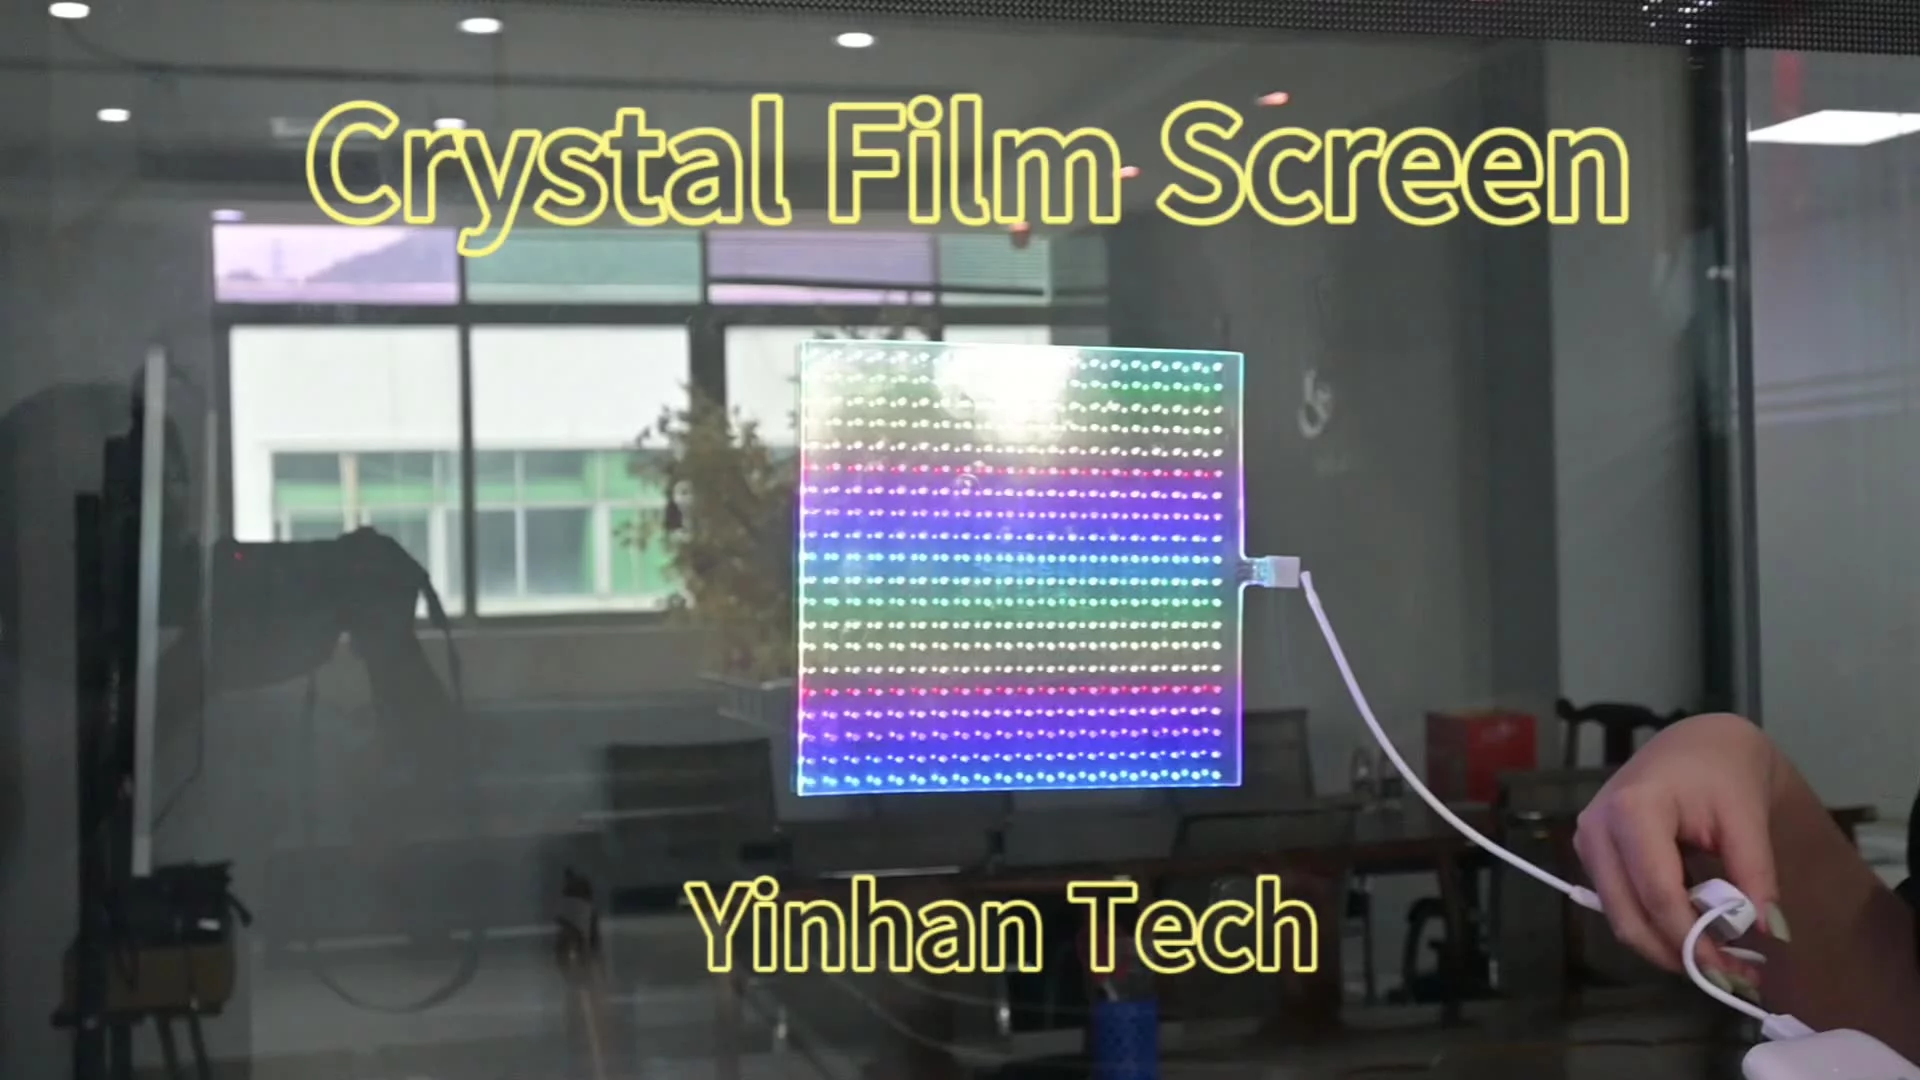 Indoor Outdoor Adhesive Transparent Flexible Led Film Crystal Screen Display Transparent Led Film Screen For Glass Big Building